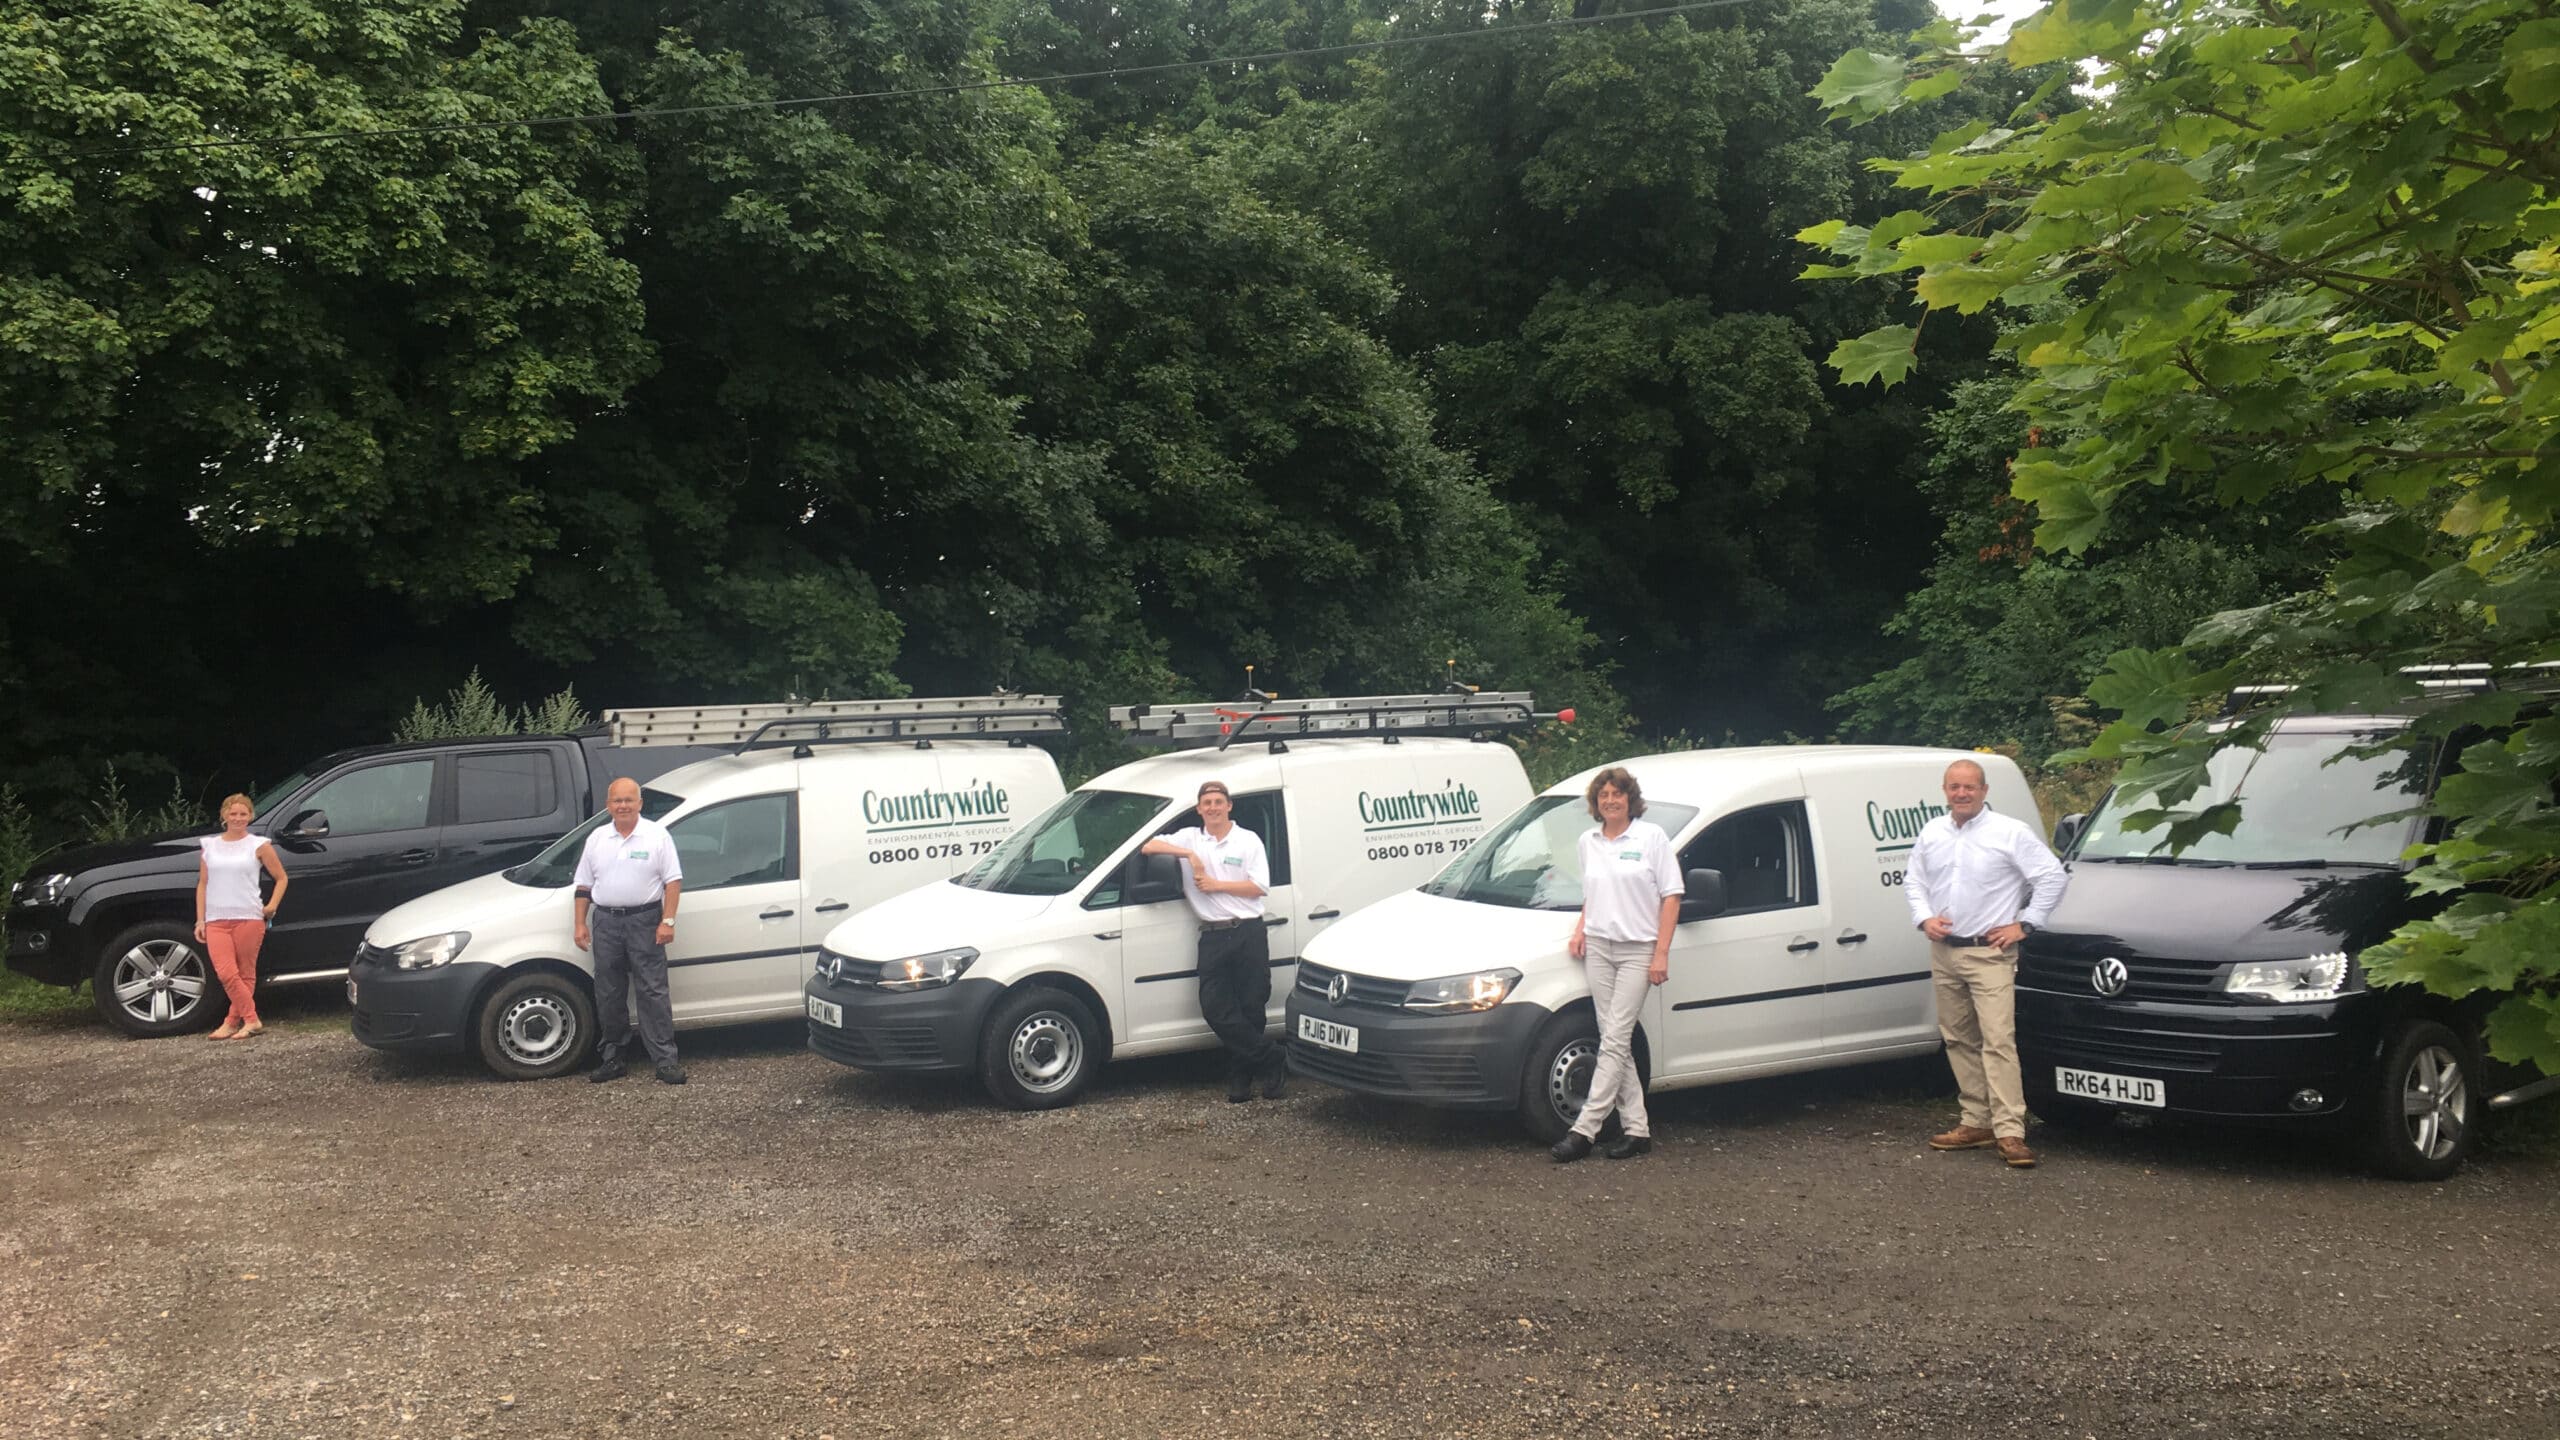 Countrywide pest control Berkshire team